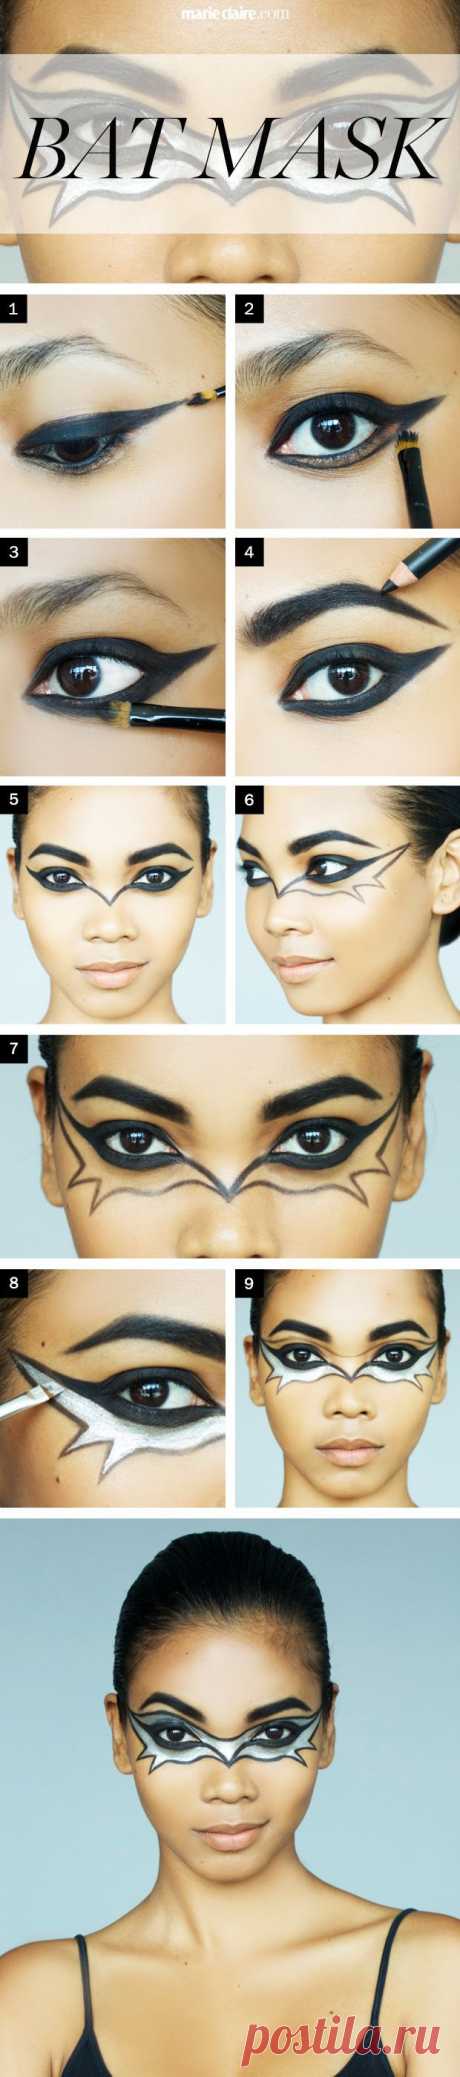 How to Get a Bat Mask Makeup Look for Halloween